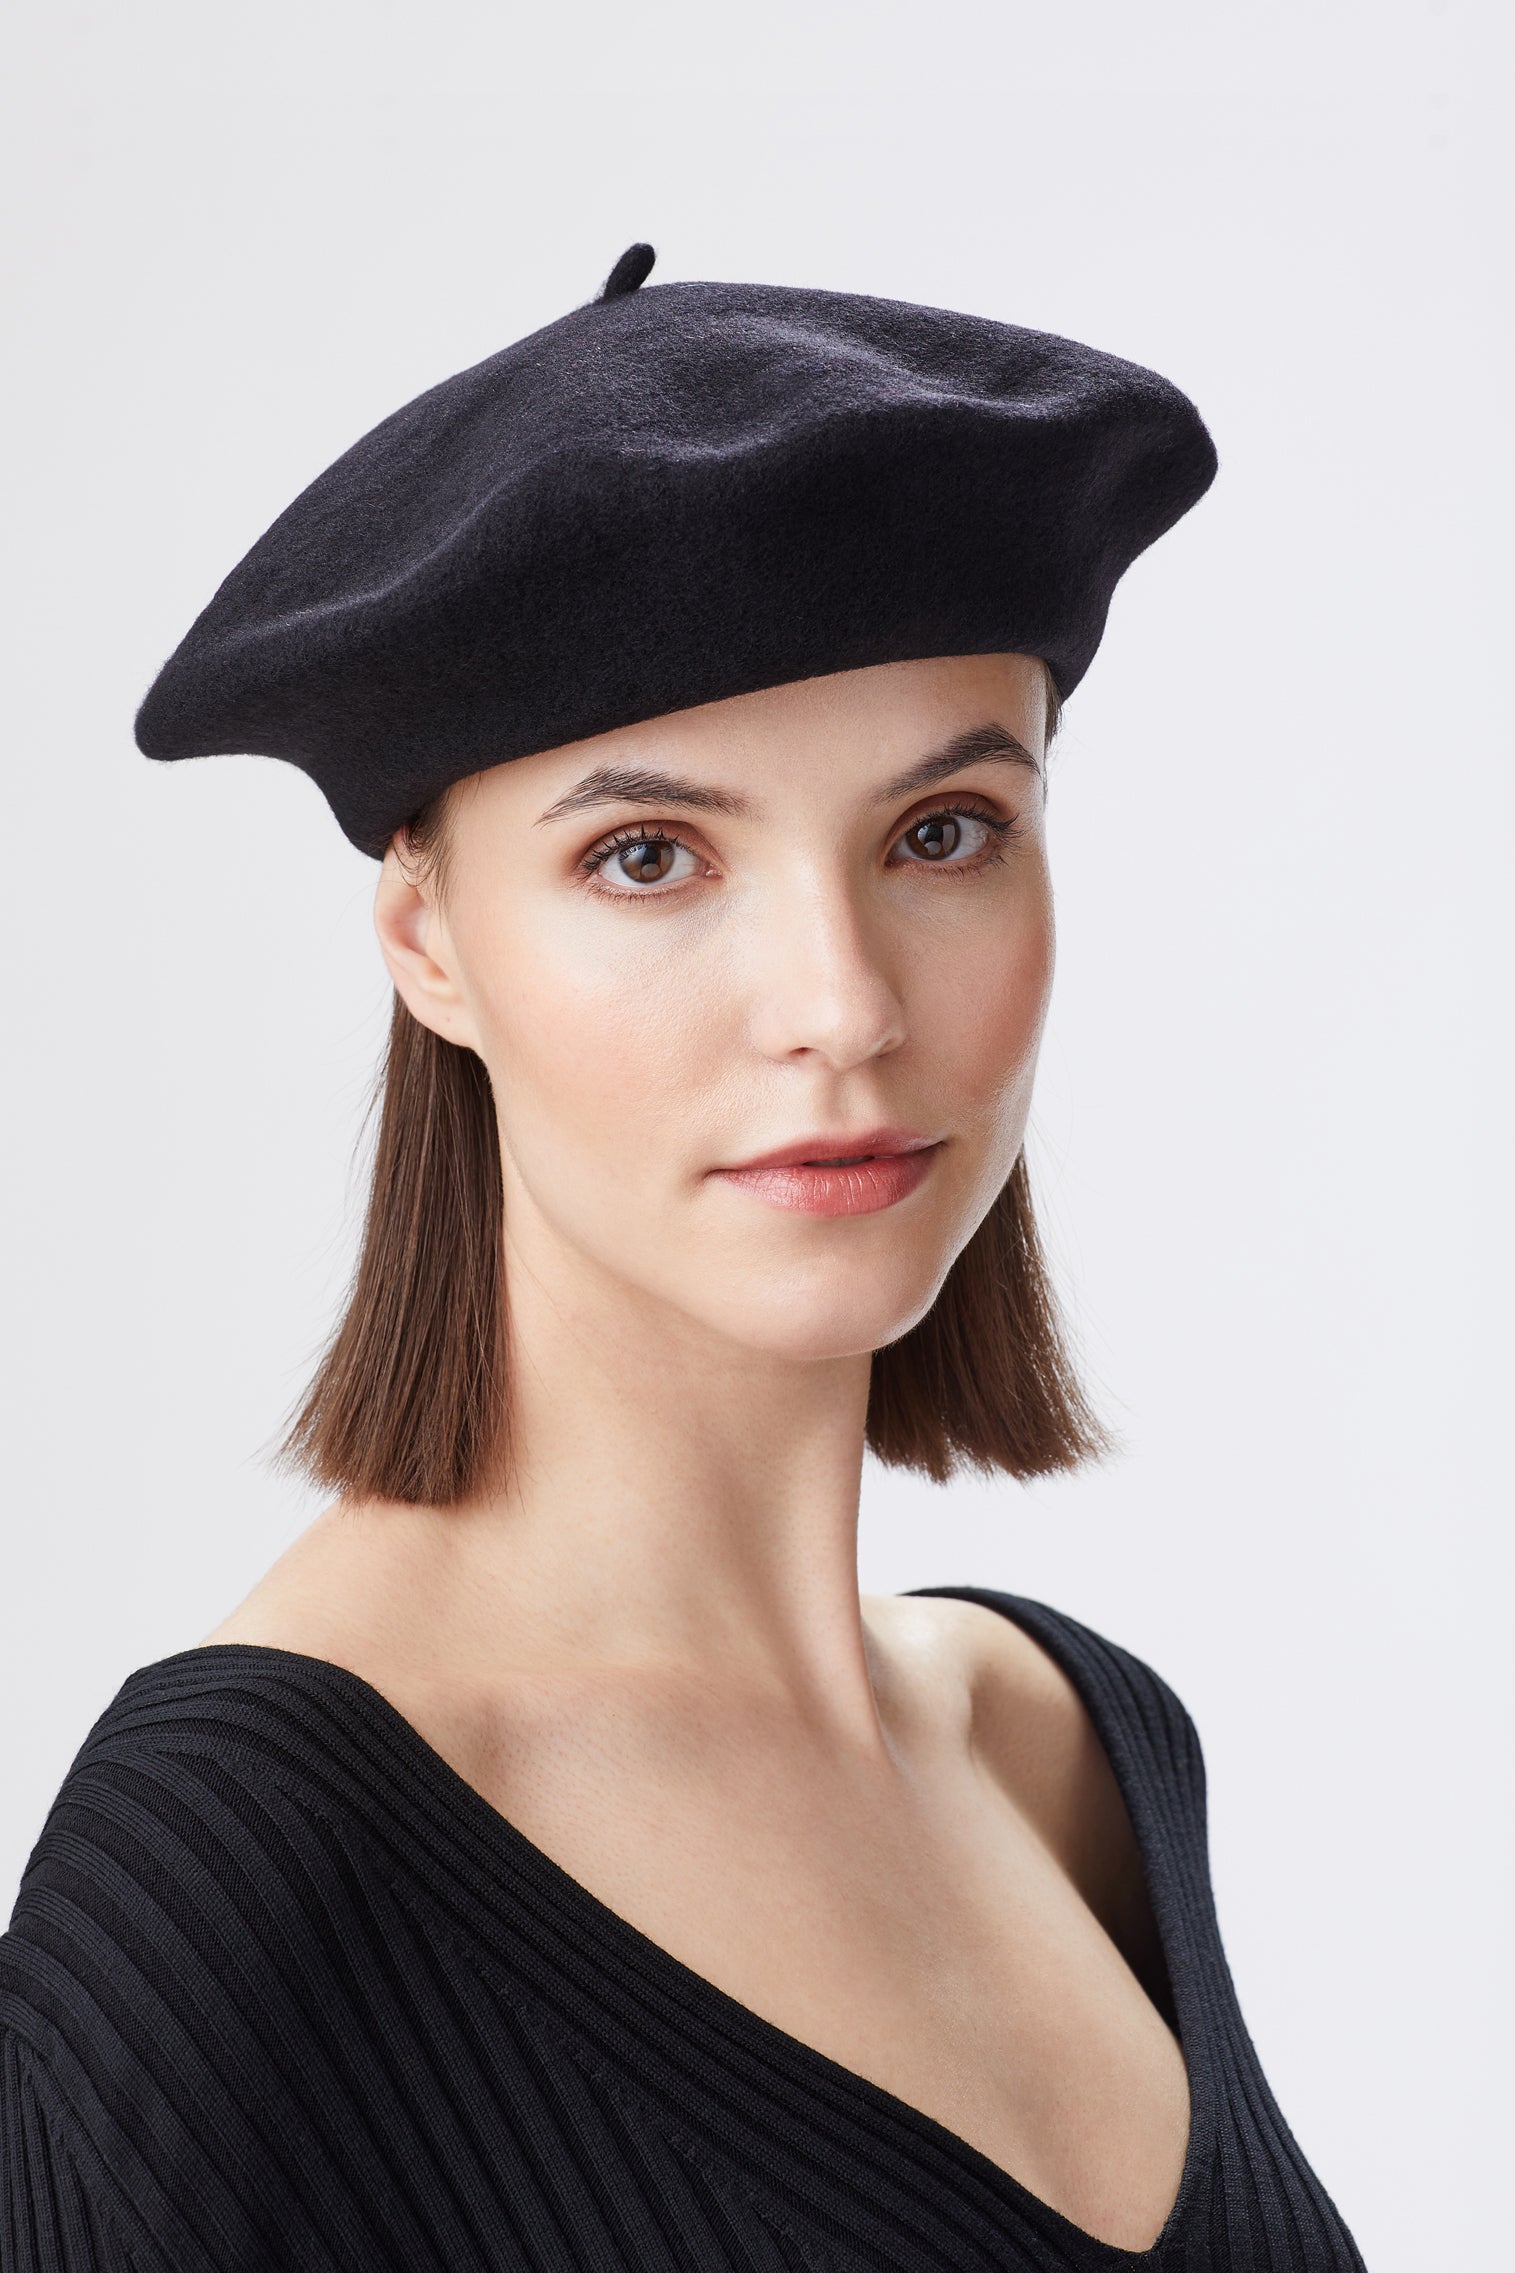 French Beret - Valentines Day Gift Ideas - Lock & Co. Hatters London UK